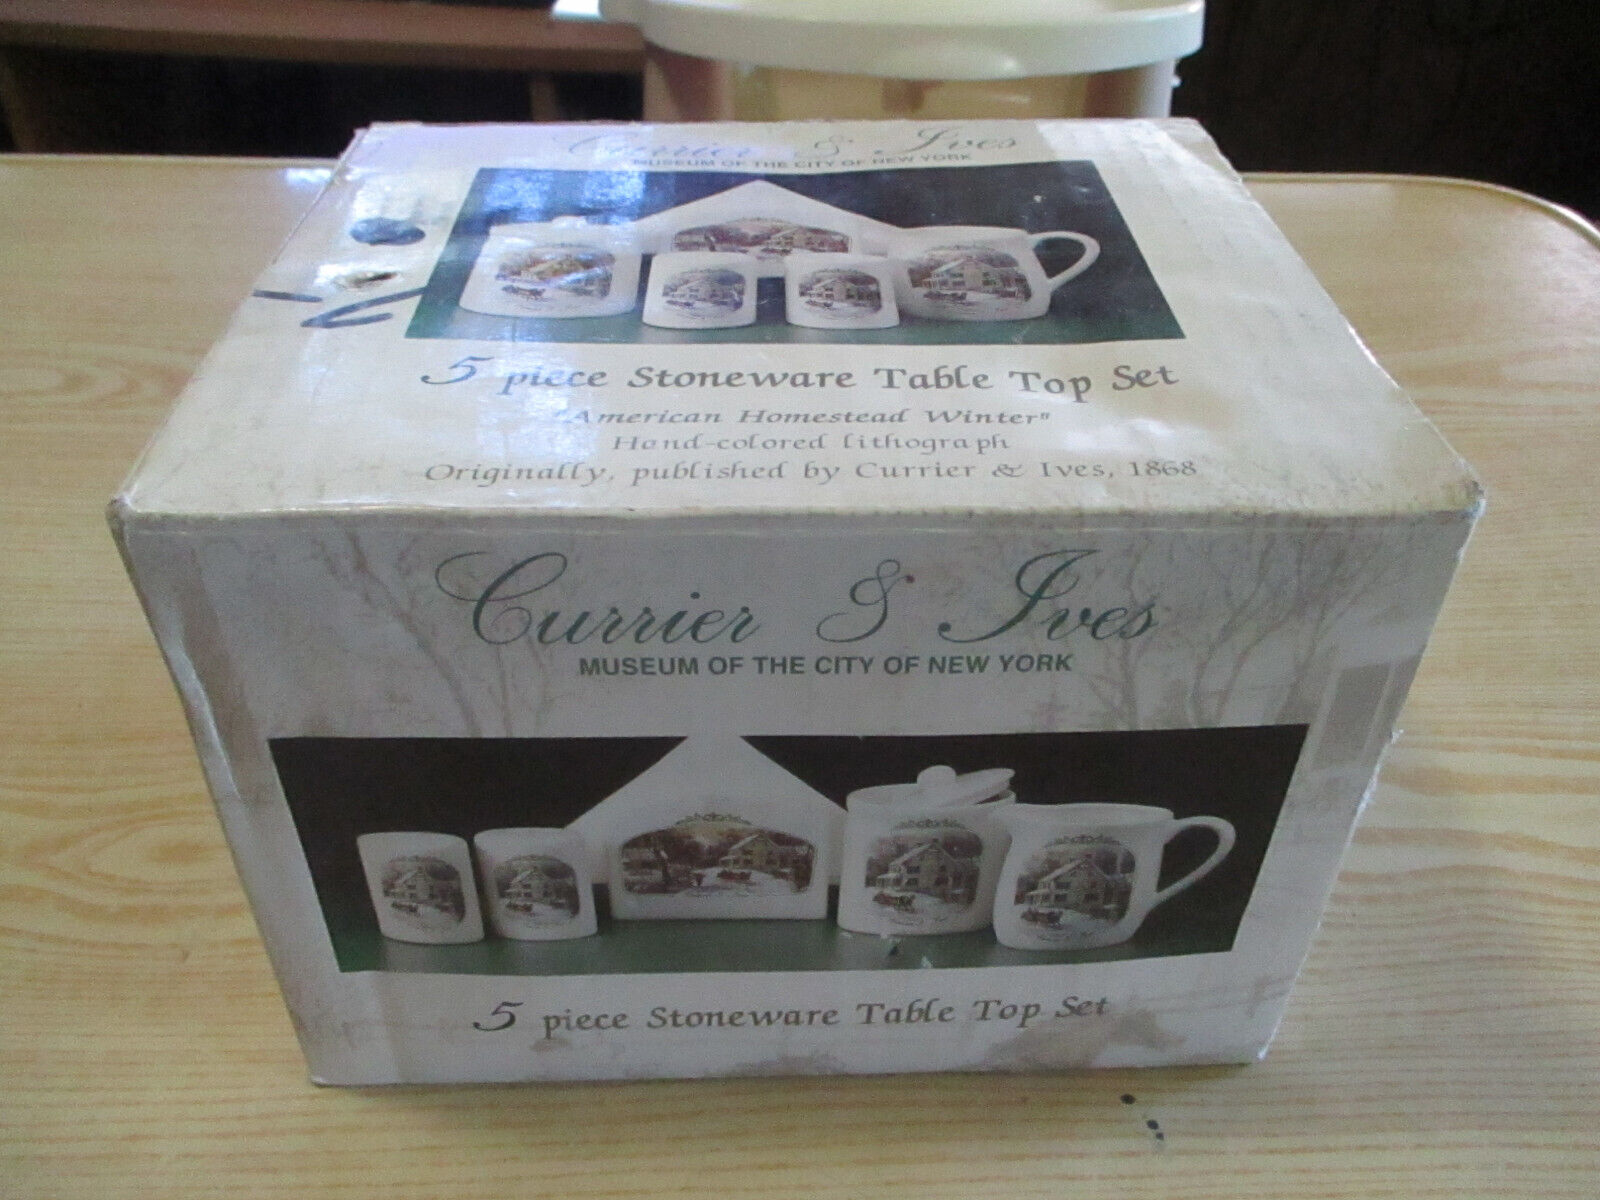 Currier & Ives American Homestead Winter 5 Pc. Stoneware Tabletop Set in Box